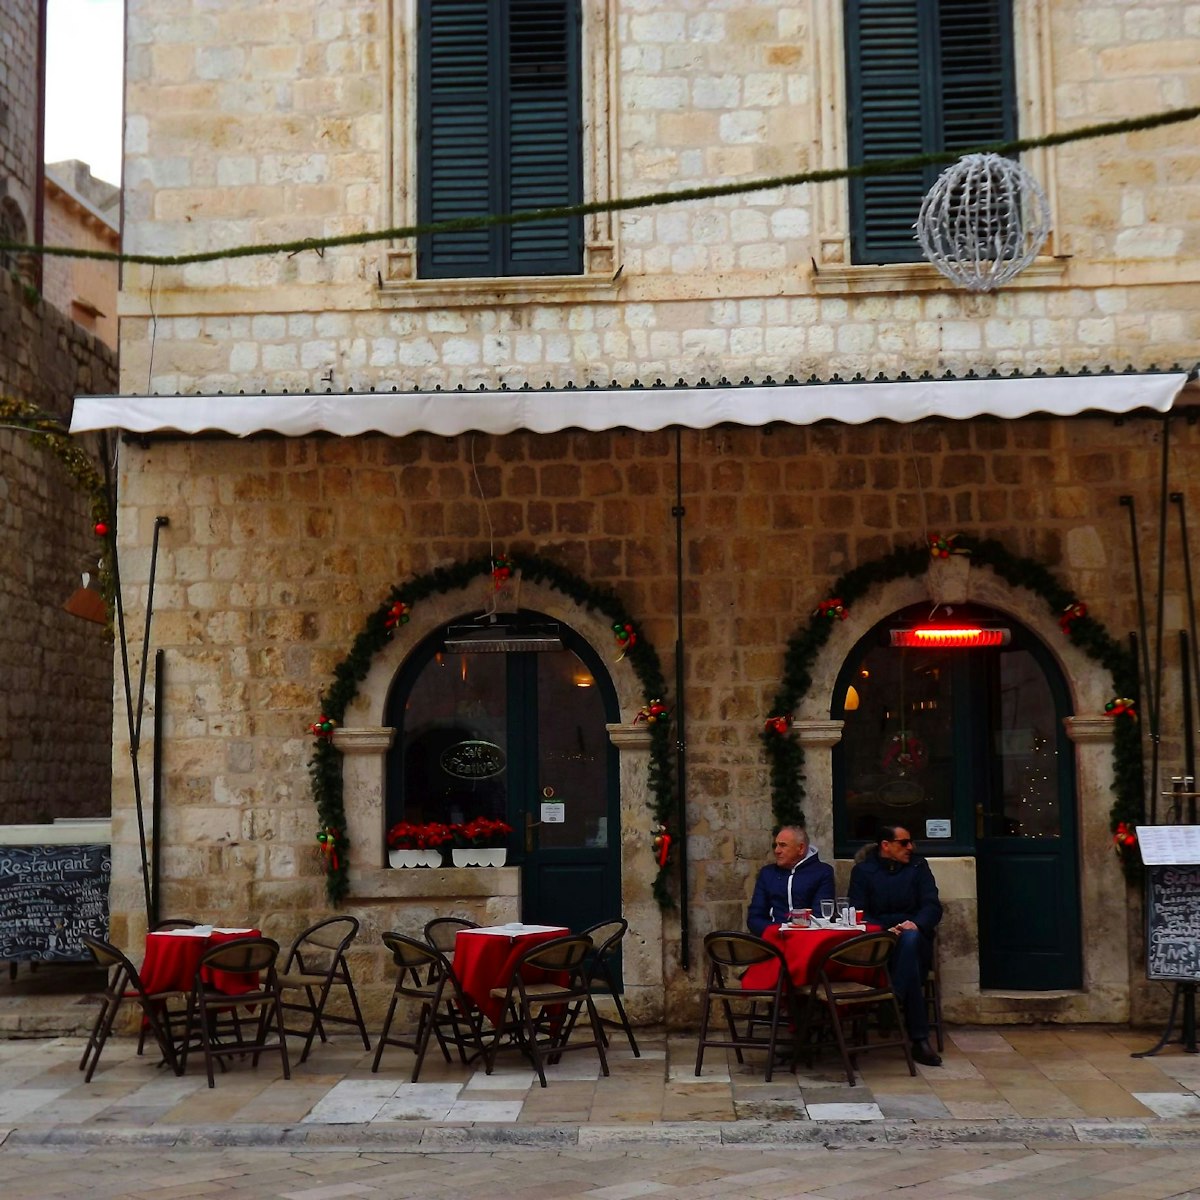 Cafe Festival sits in a 17th-century palace on Stradun